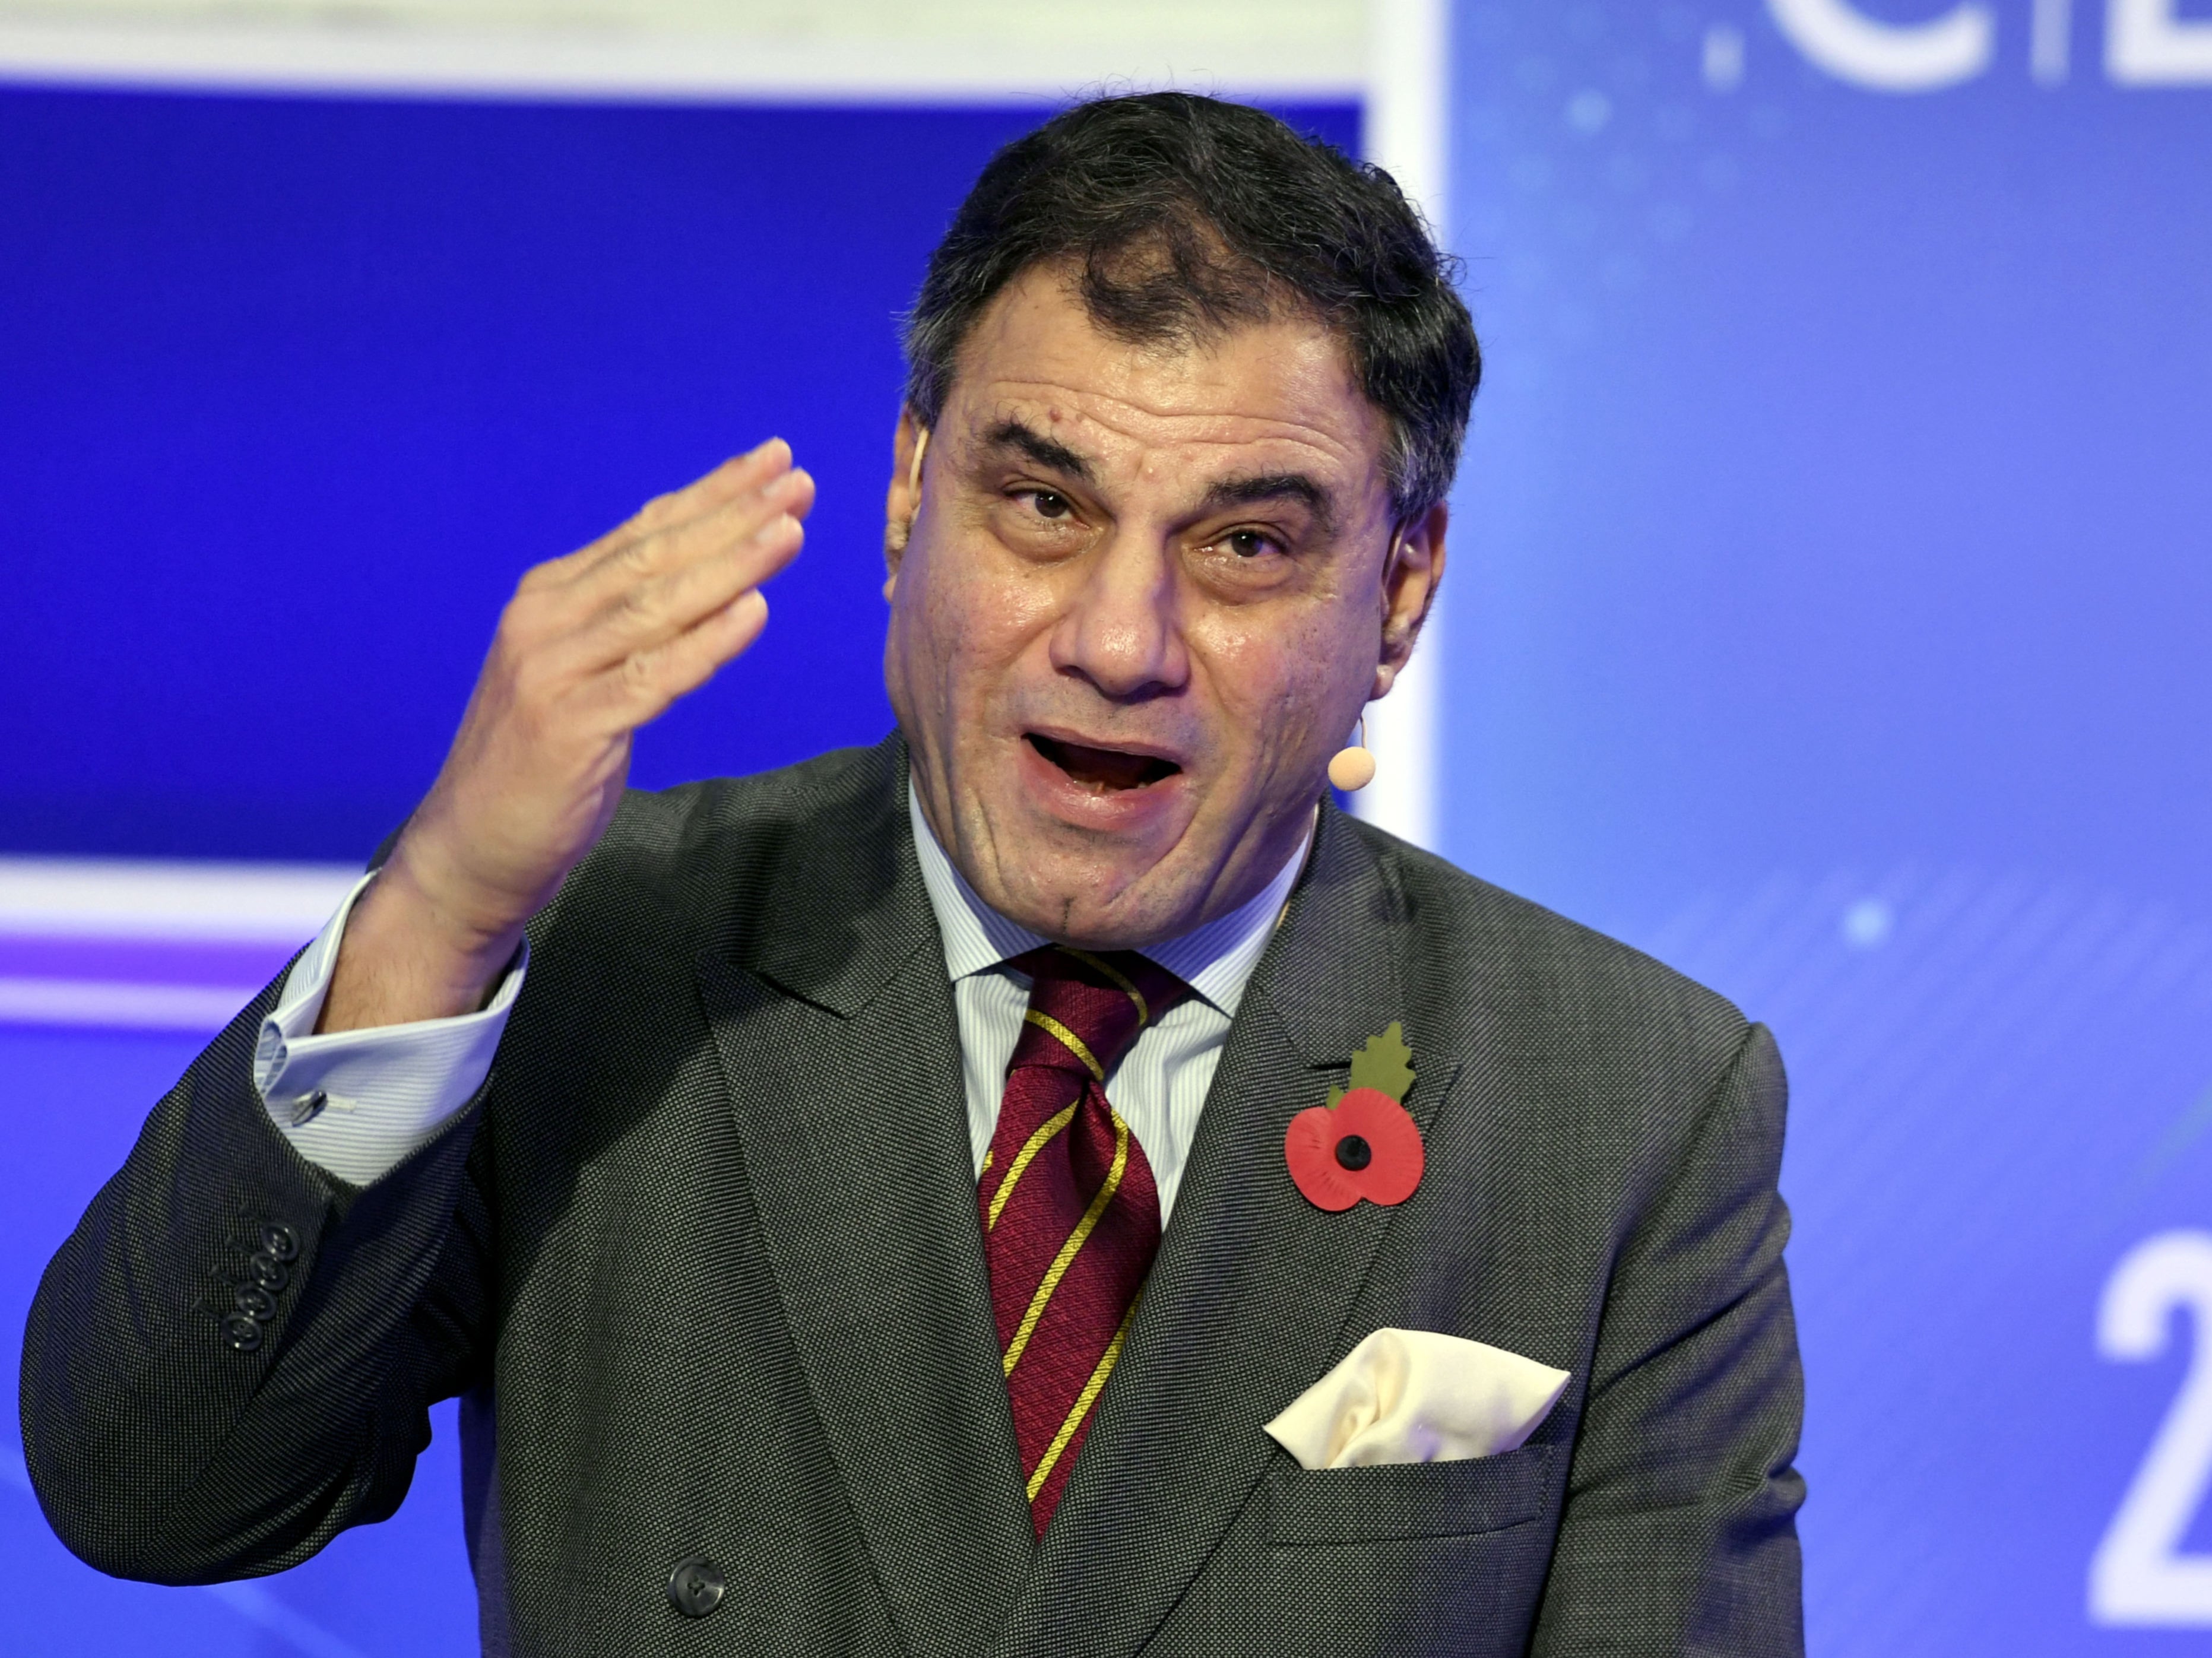 Karan Bilimoria says recruiting foreign students for higher education is essential